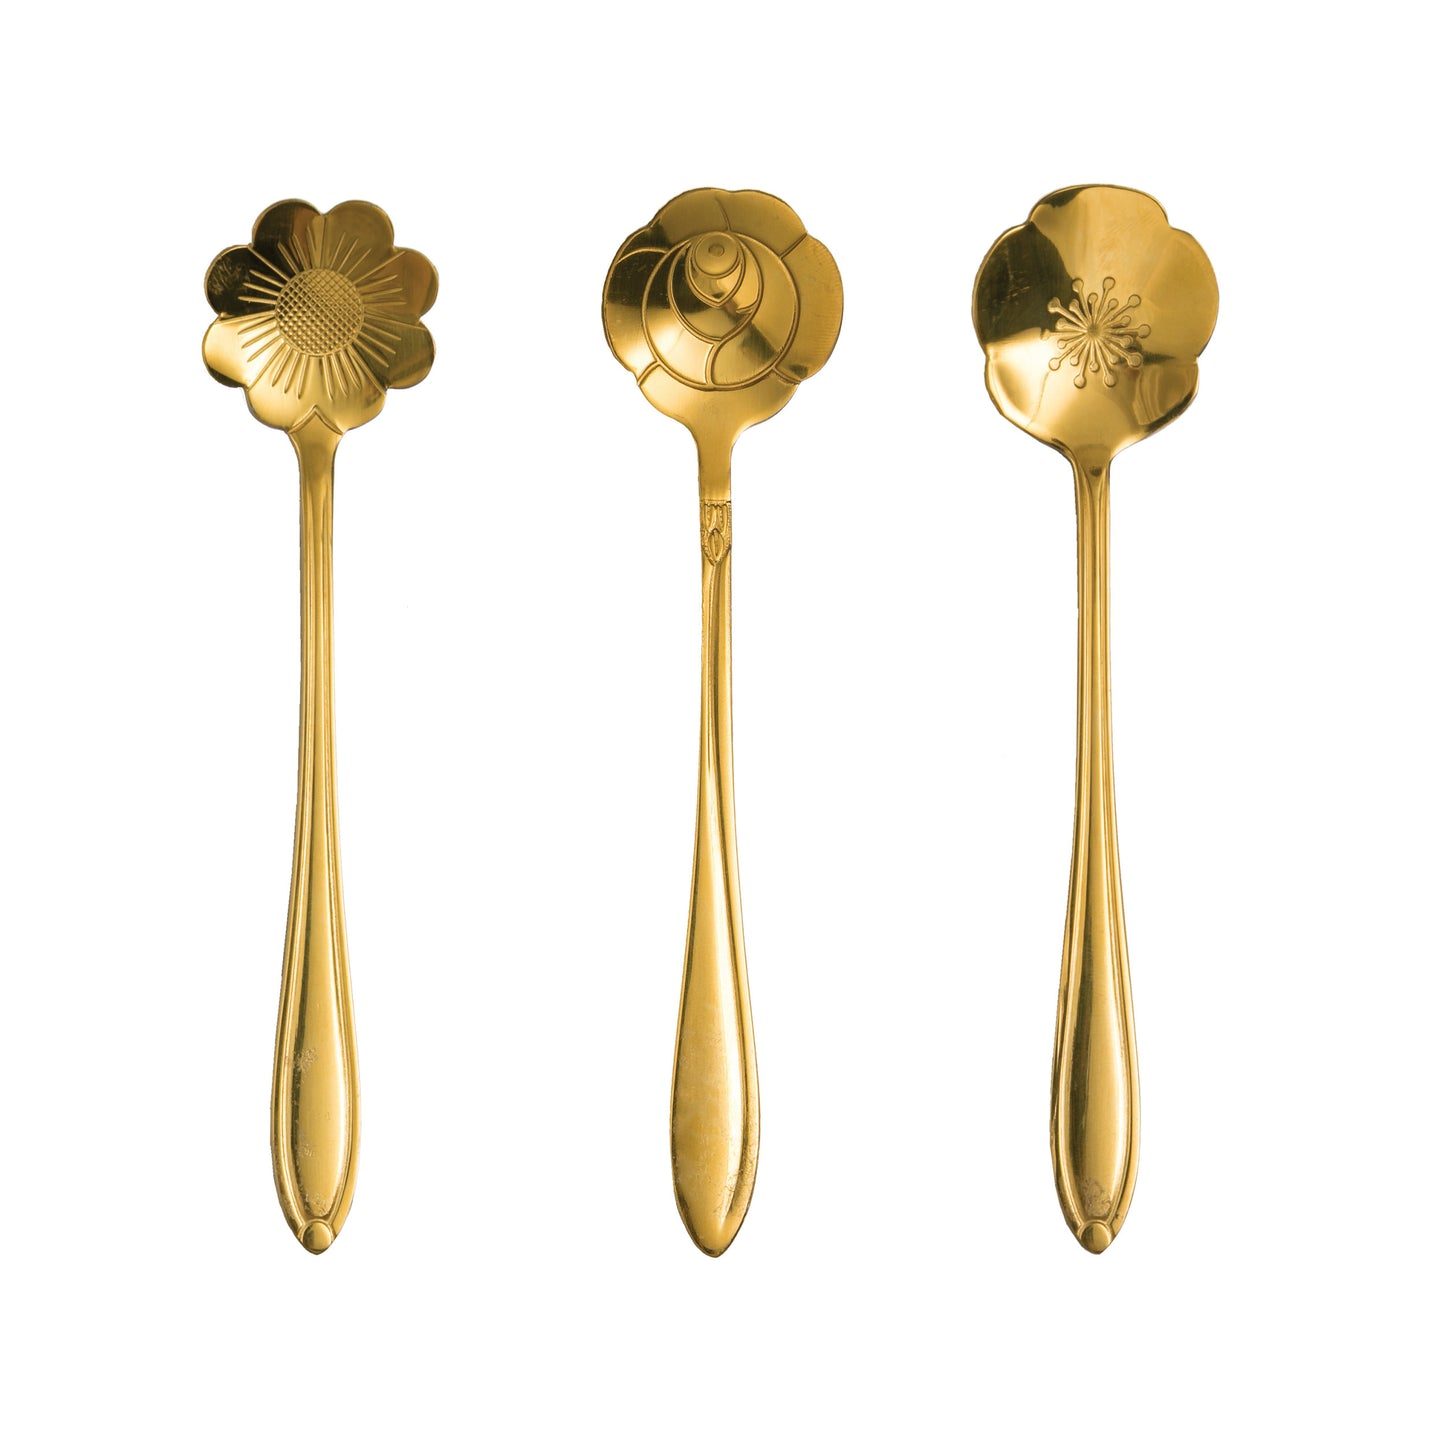 Gold Flower Shaped Spoons